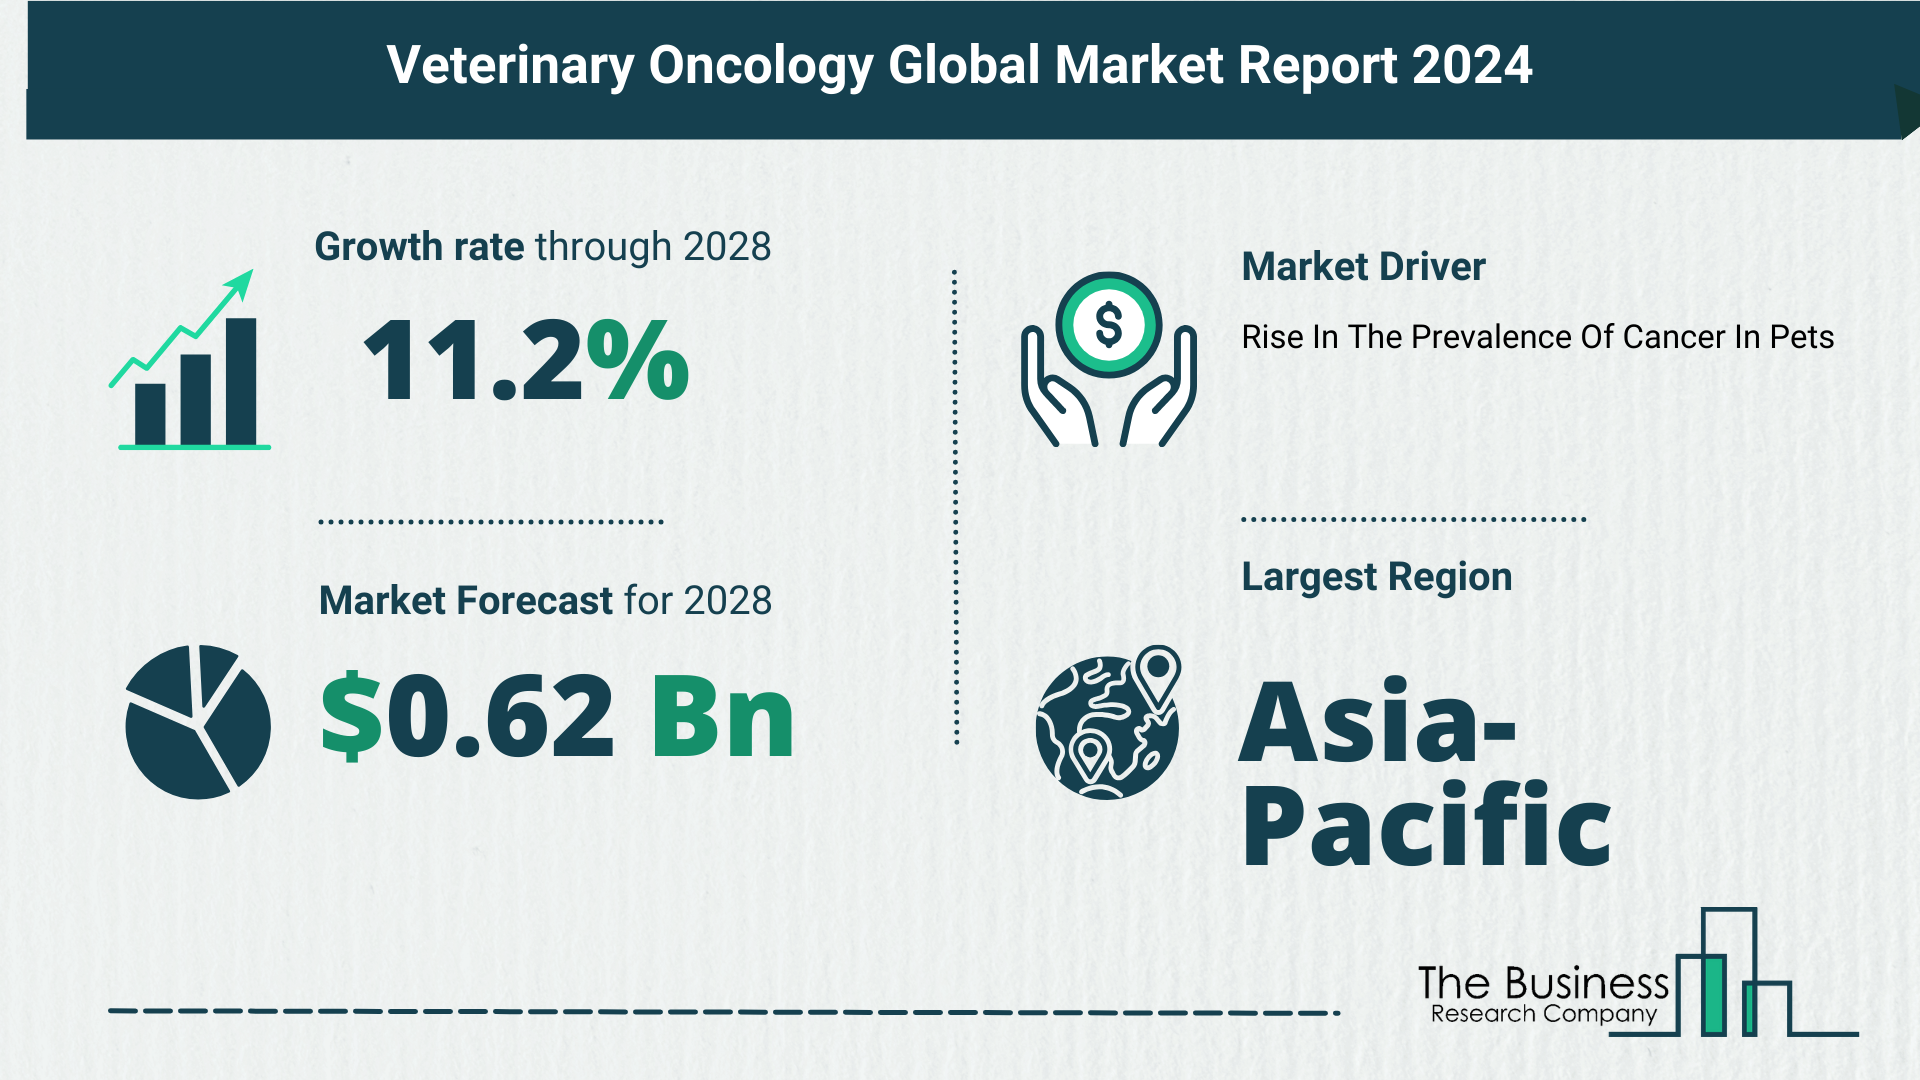 Global Veterinary Oncology Market